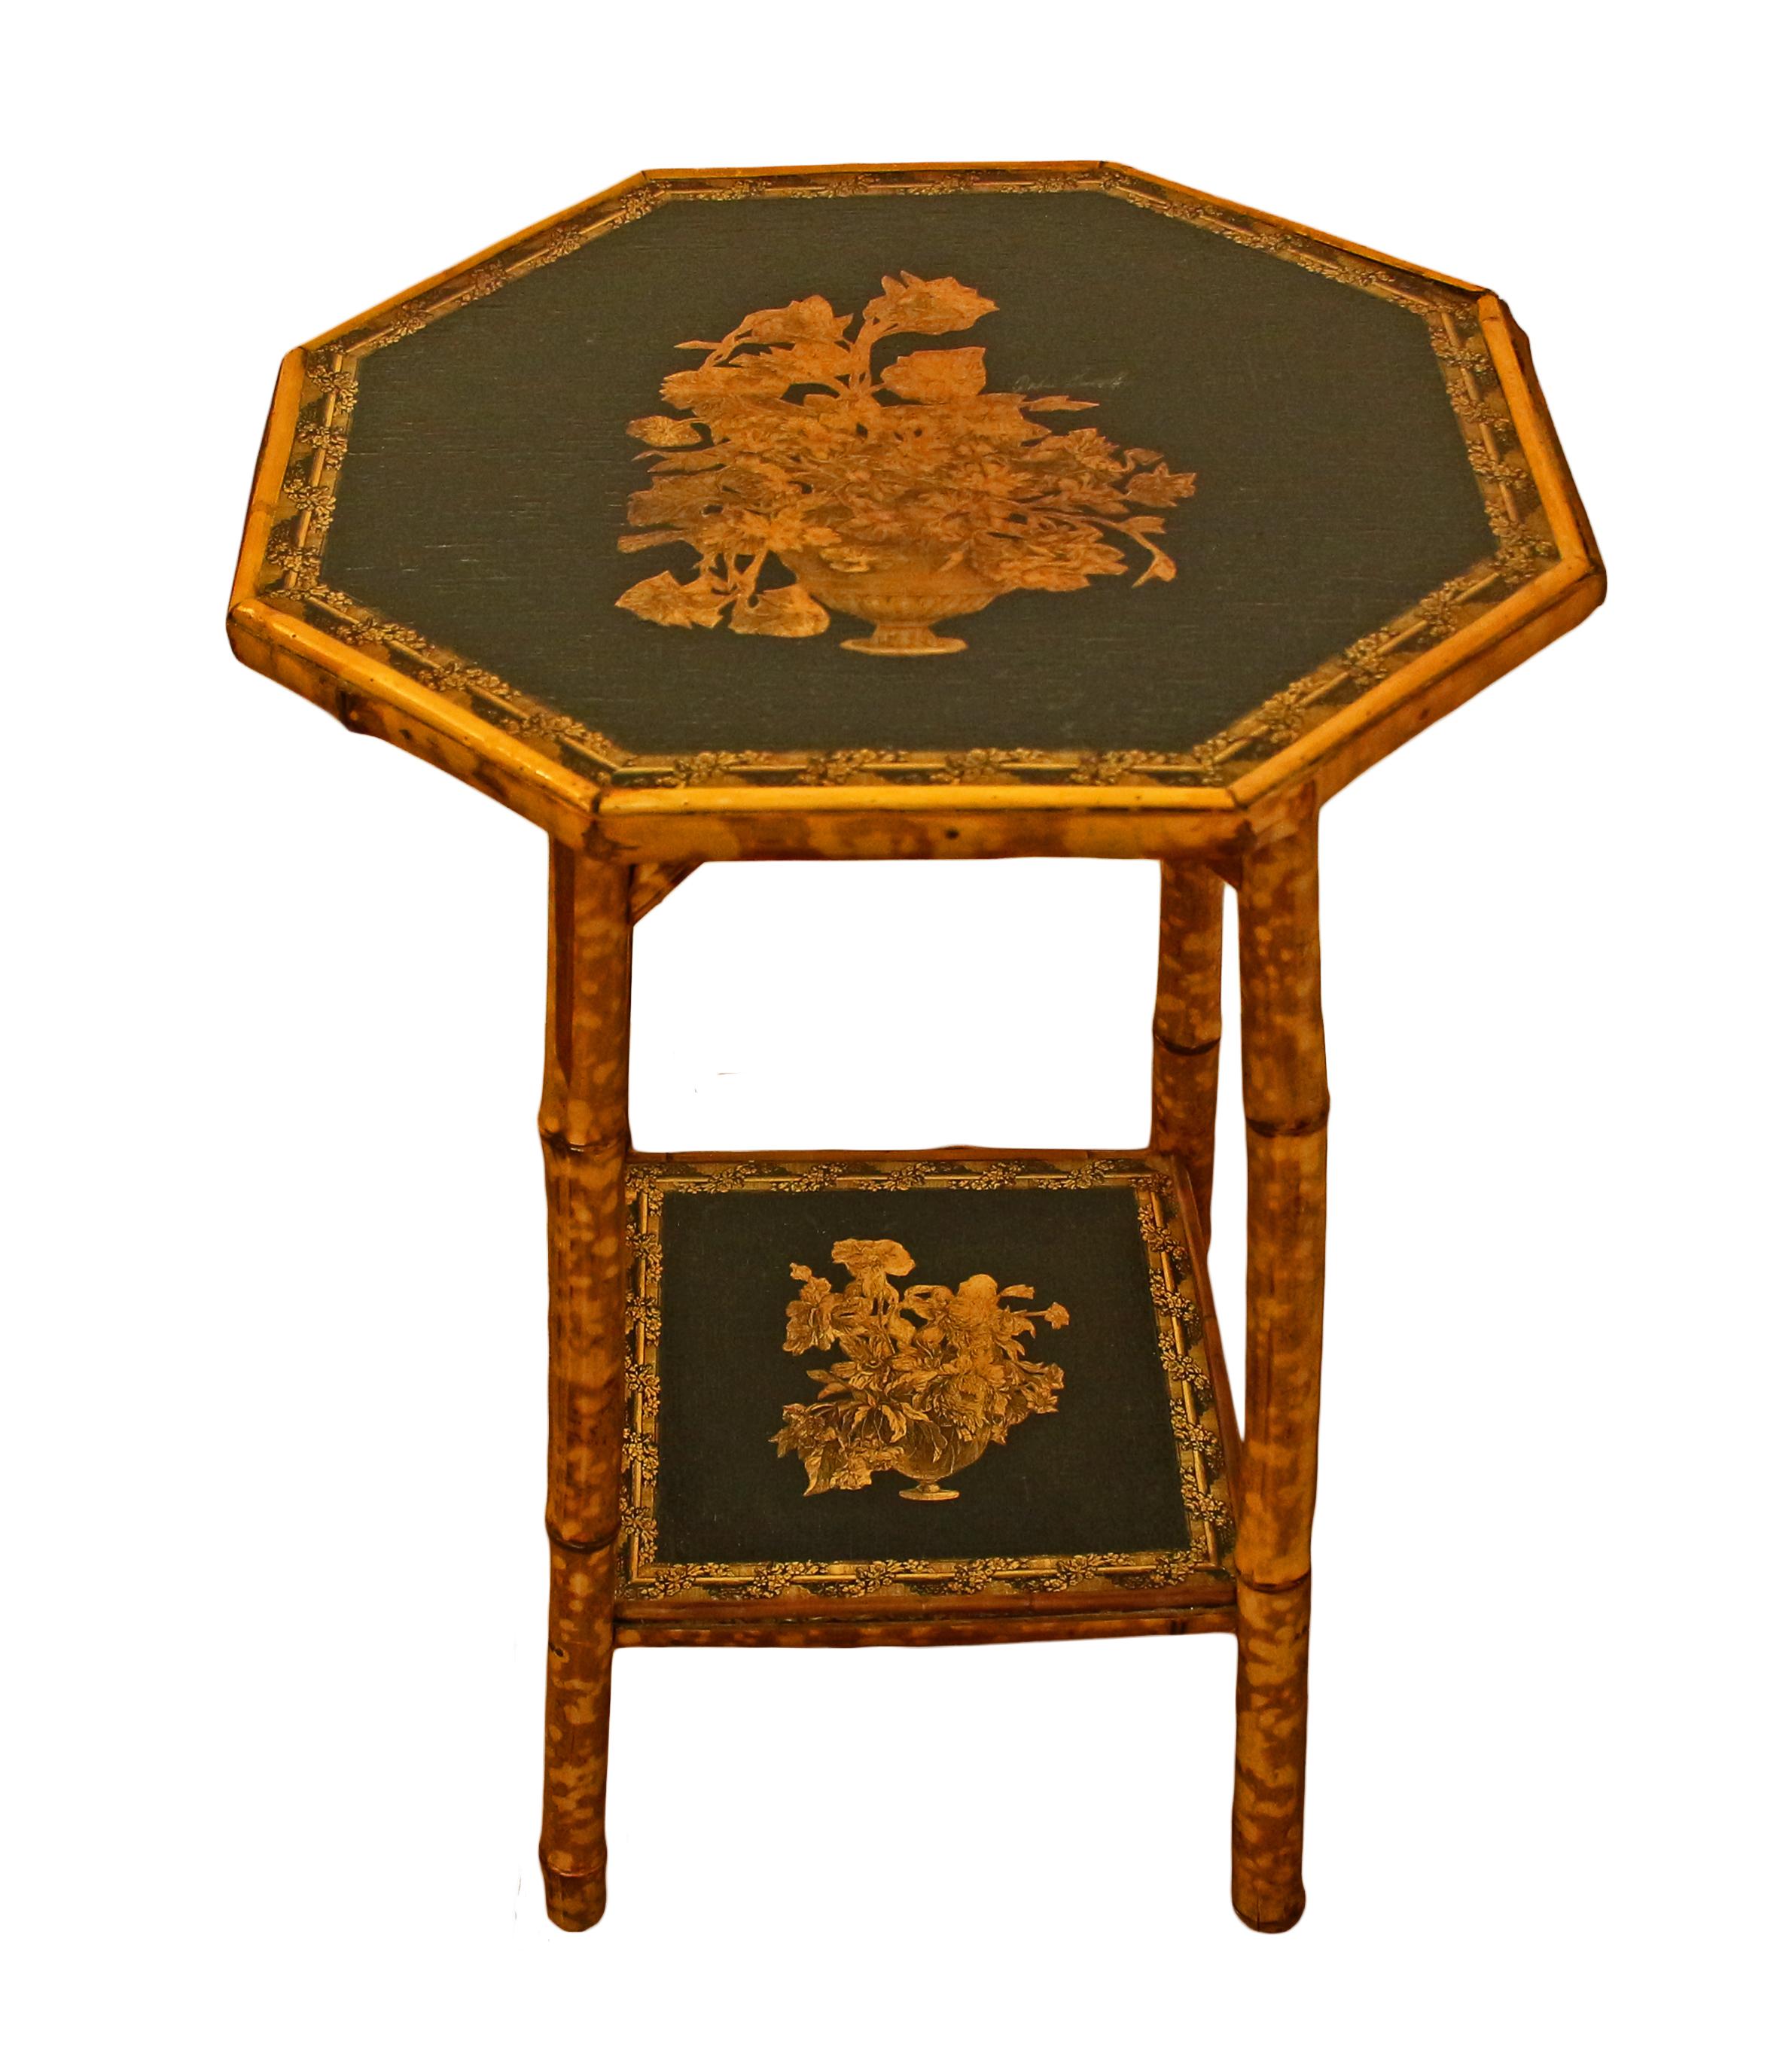 Octagonal 2-tier bamboo side table, English, circa 1870. Well figured bamboo. Straight legs with upper architectural strut supports. Newly decoupaged with a vase of flowers & botanical garland border. Measures: 18 1/4